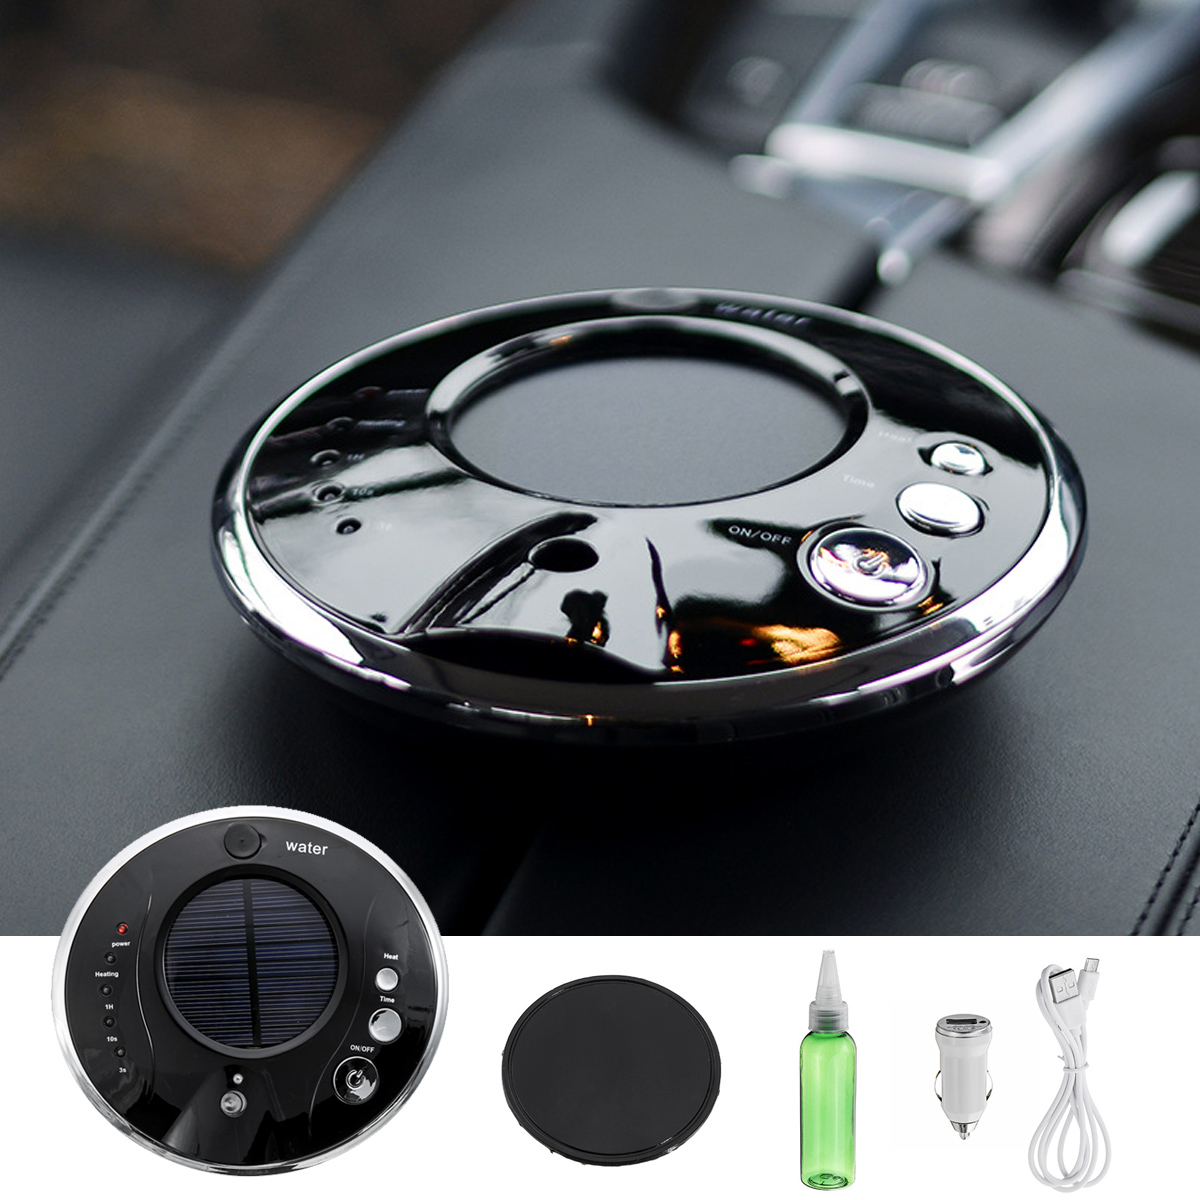 Car-Solar-Powered-Negative-Ion-Air-Purifier-5V-Cleaner-Purifier-humidification-1670794-6